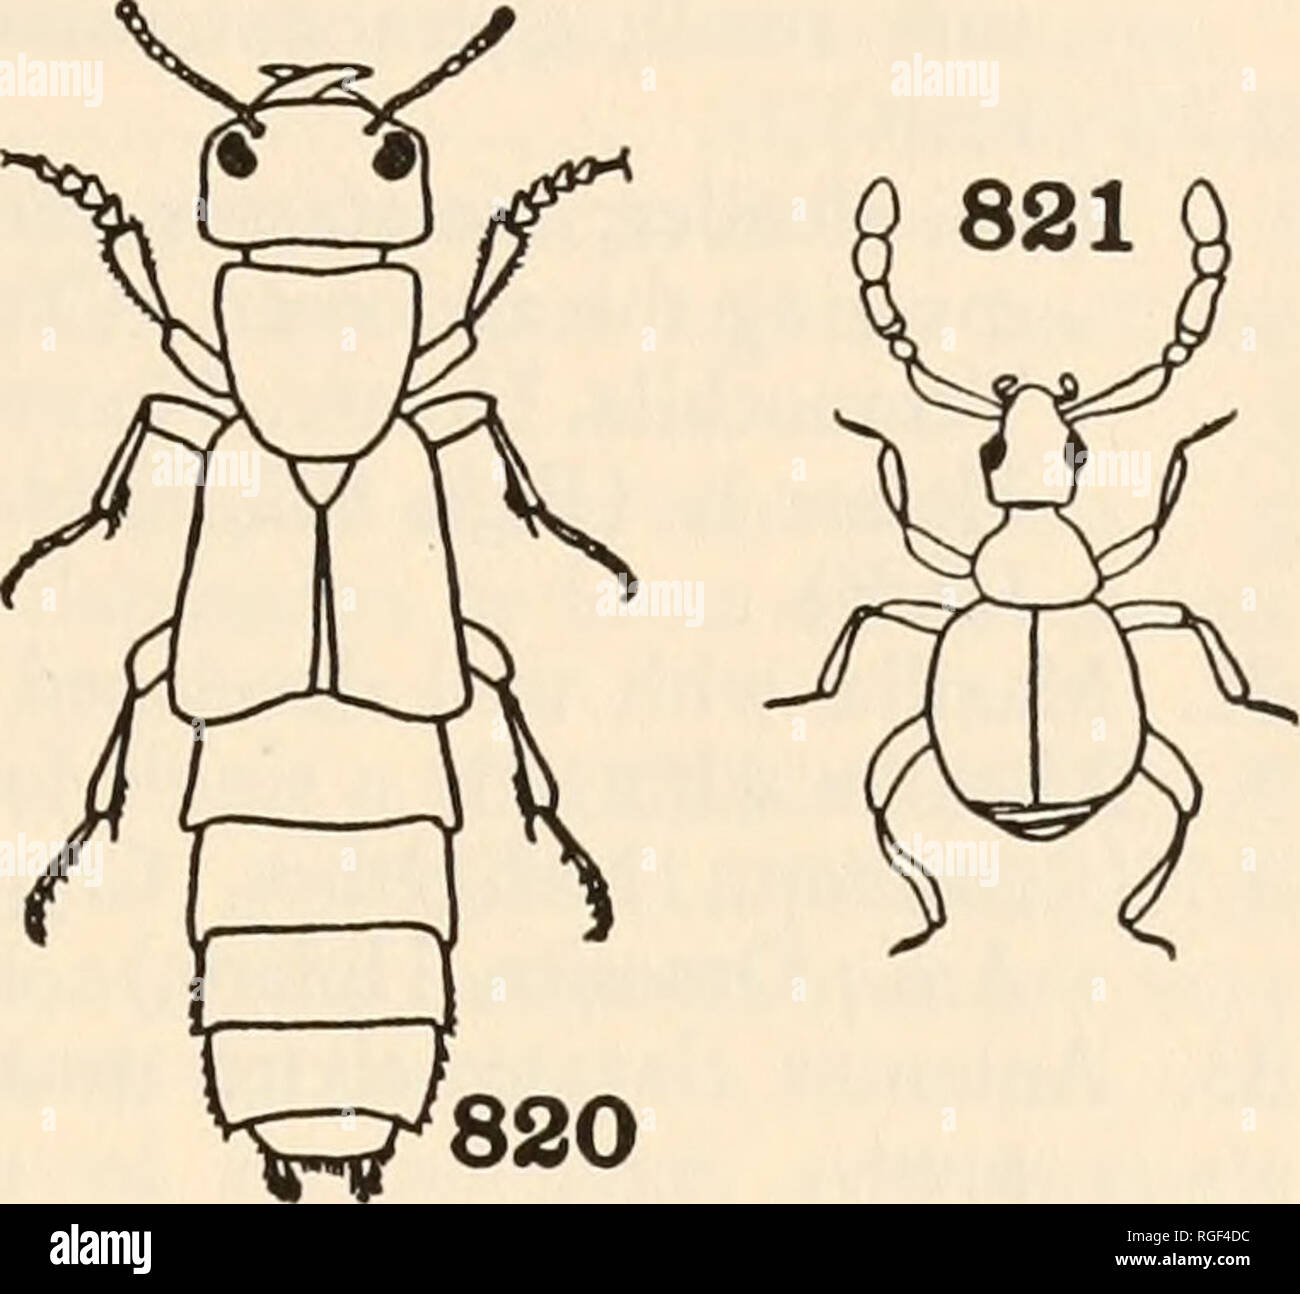 . Bulletin of the Museum of Comparative Zoology at Harvard College. Zoology. Figs. 818-821. Coleoptera 818. Brachinus. Carabidae. 819. Glischrochilus (Felt) Nitidulida:. 820. Staphylinus. Staphylinidae. 821. Goniastes. (Westwood) Pselaphidae. 28. First three tergites connate; last joint of tarsi long, with very large claws; small, aquatic or subaquatic beedes. (Dryops Helichus, widespr.; Lutrochus, Am.; Sostea, Indomal.). (PARN1D/E). DRY6PID^E All tergites free; last tarsal joint not elongated, the claws not en- larged; terrestrial species.1 (Dascillus, Eubrianax, Holarc; Arte- matopus, Neotro Stock Photo